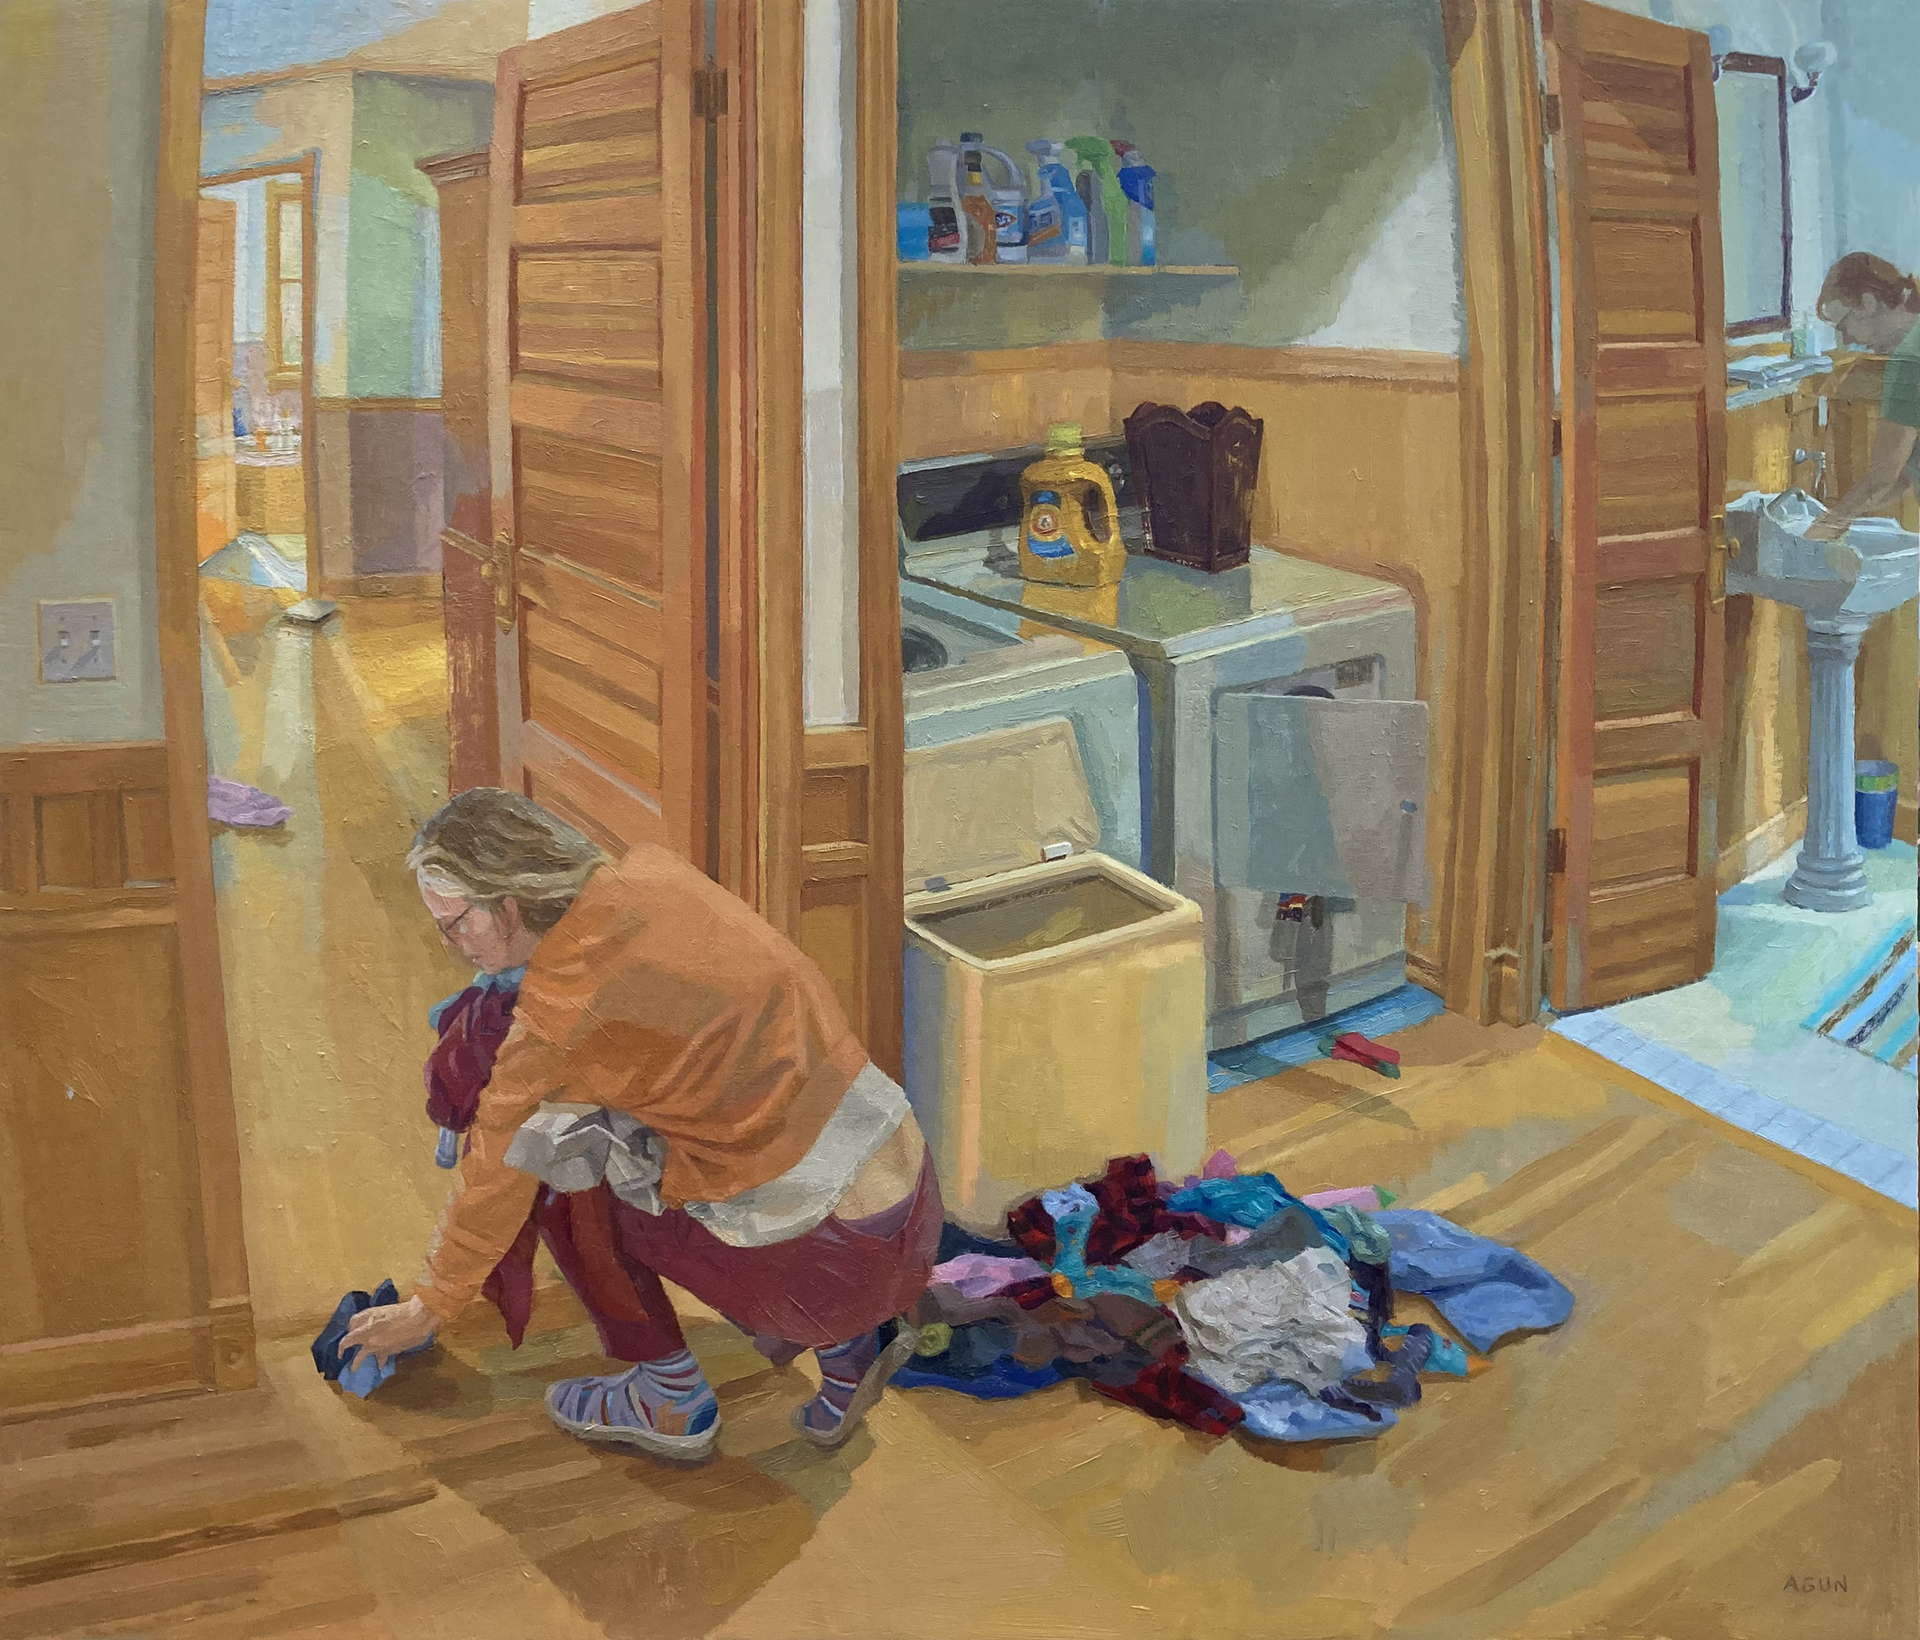 Oil painting of a woman doing laundry.